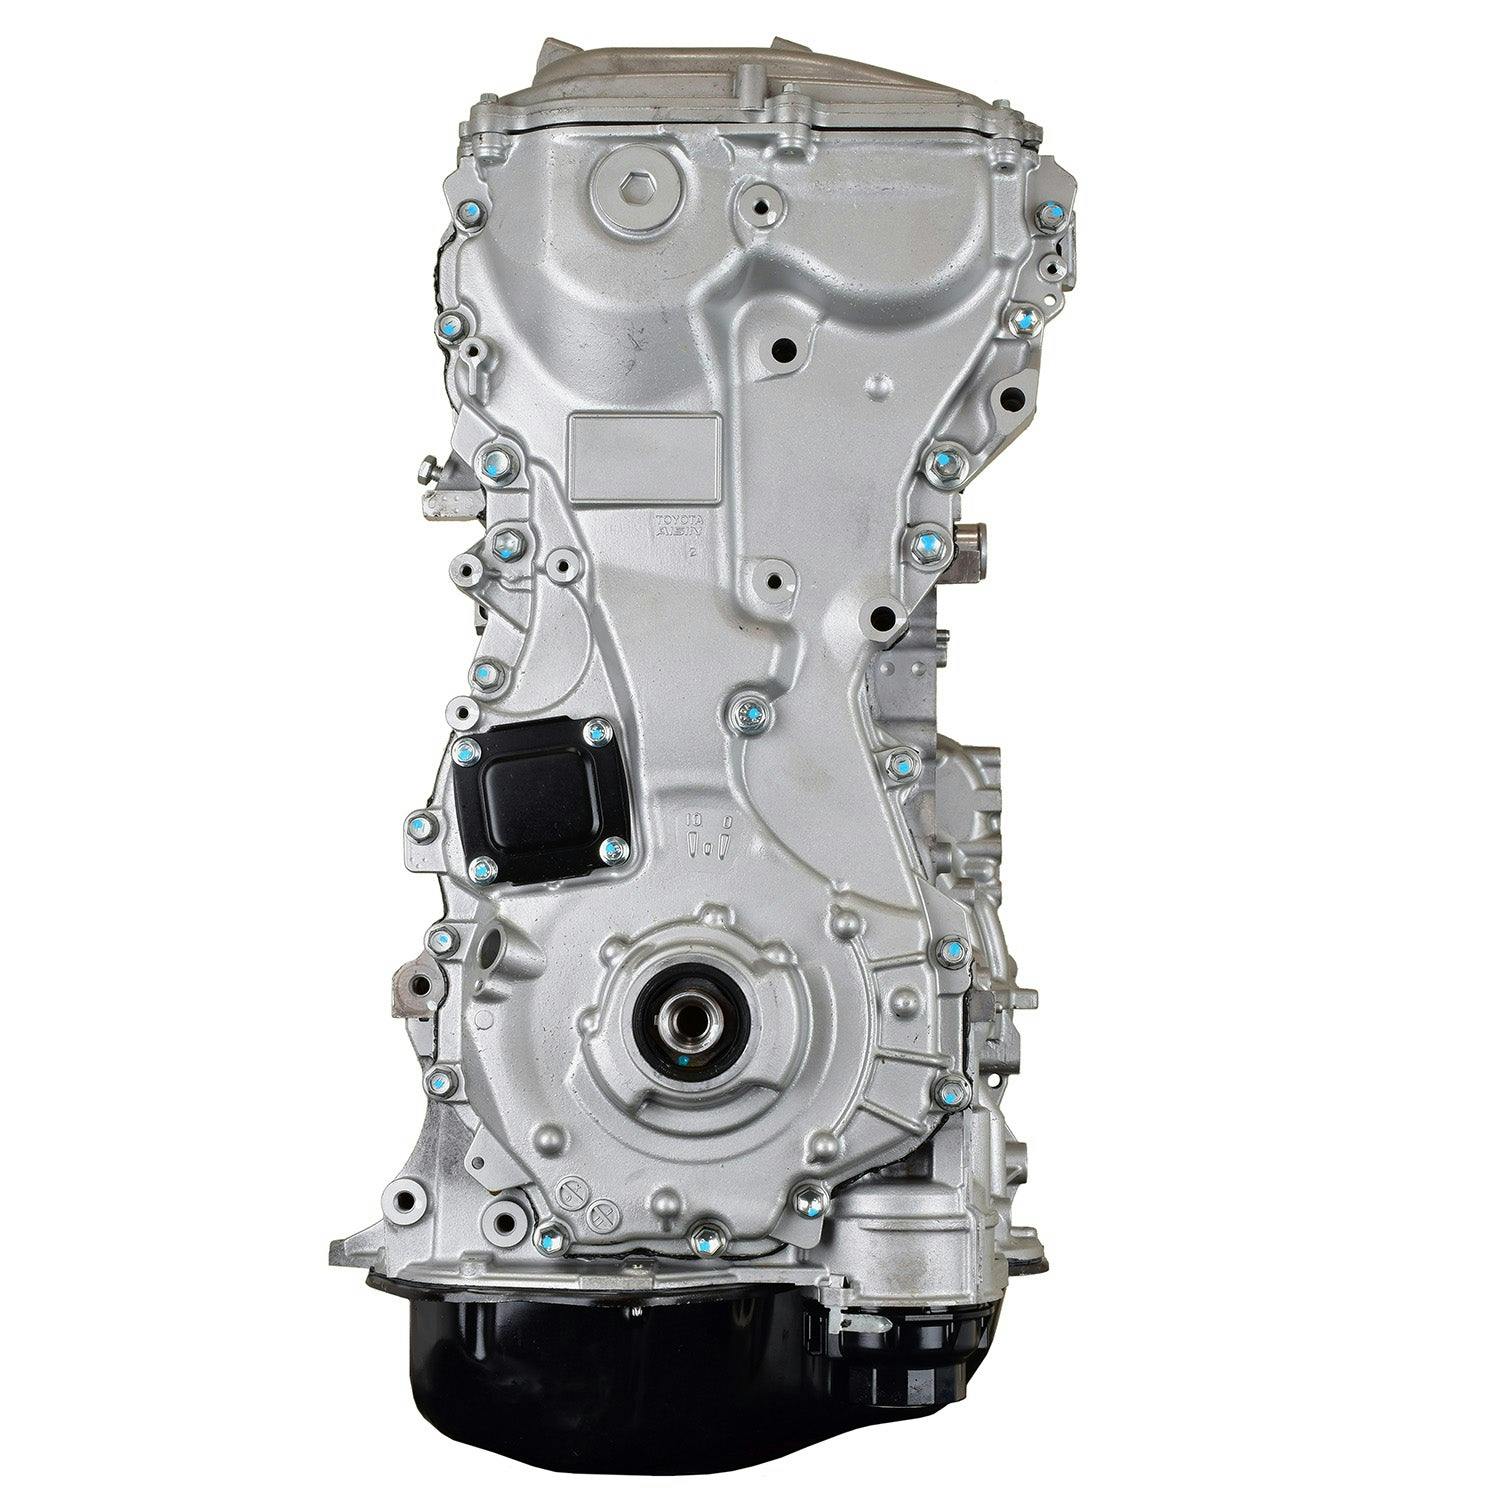 2.5L Inline-4 Engine for 2010-2017 Toyota Camry